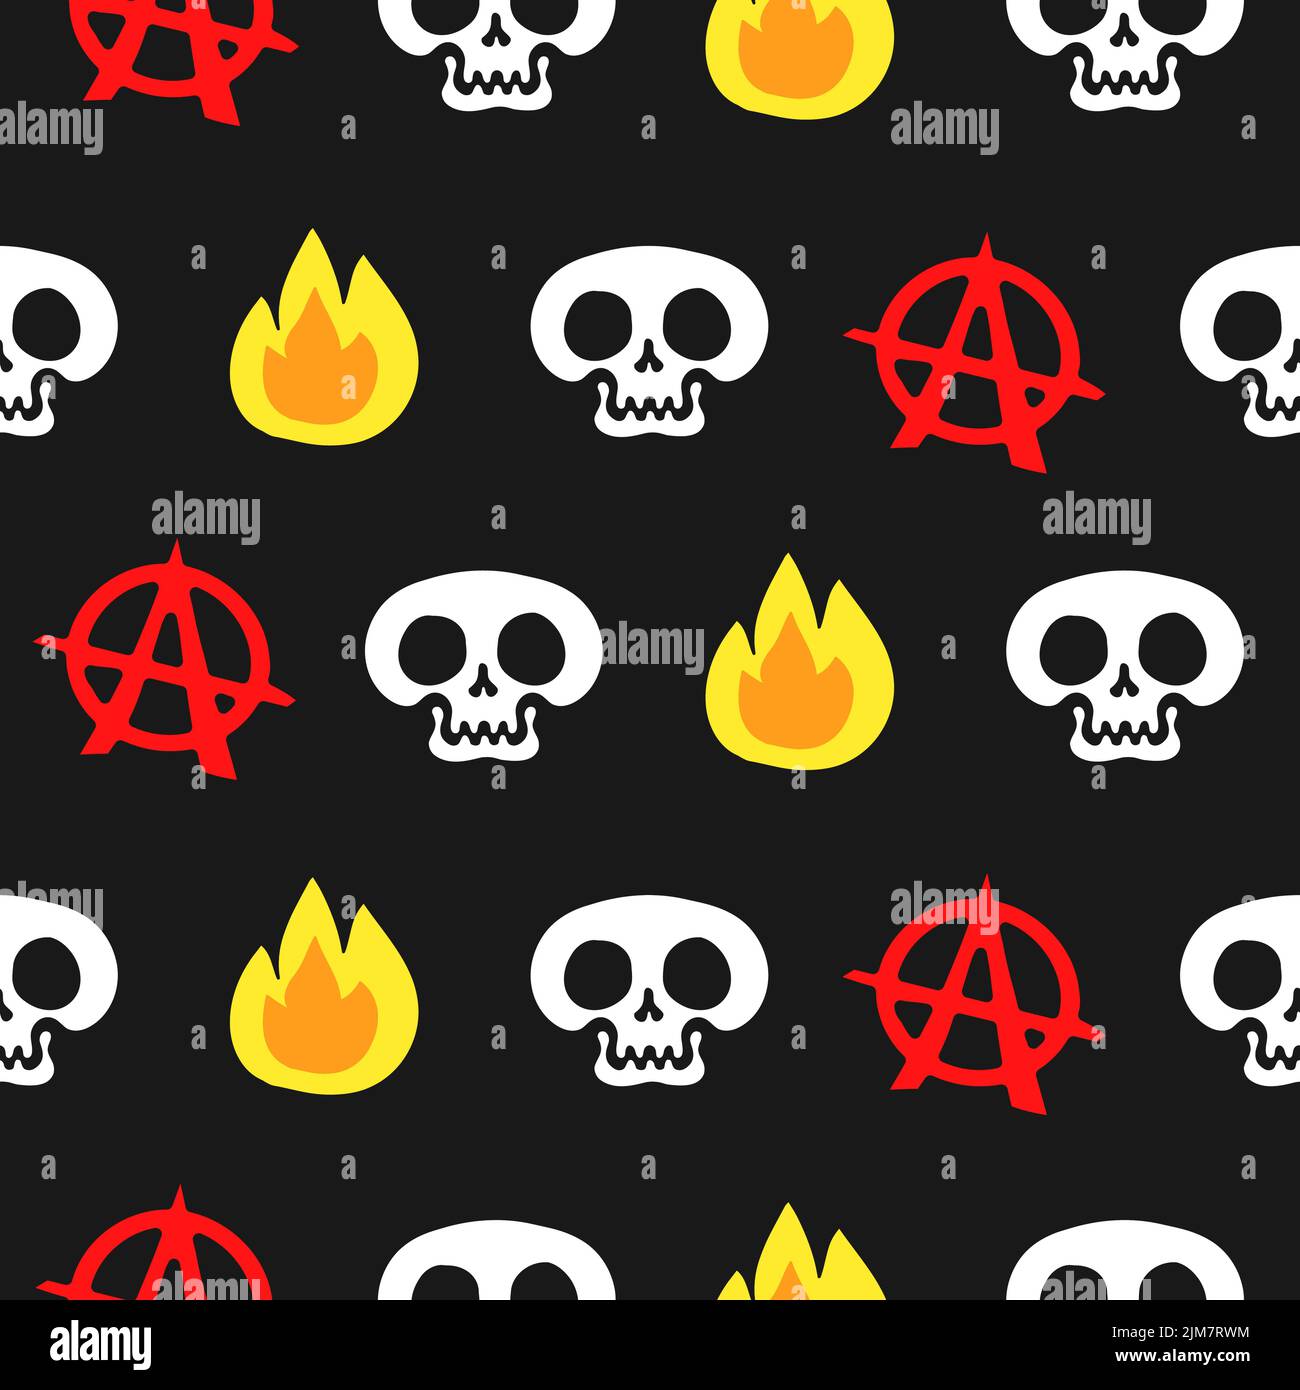 Skull,anarchy sign and flame seamless pattern,wallpaper.Vector hand drawn cartoon character illustration.Skull,fire,flame,anarchy,punk seamless pattern wallpaper print Stock Vector